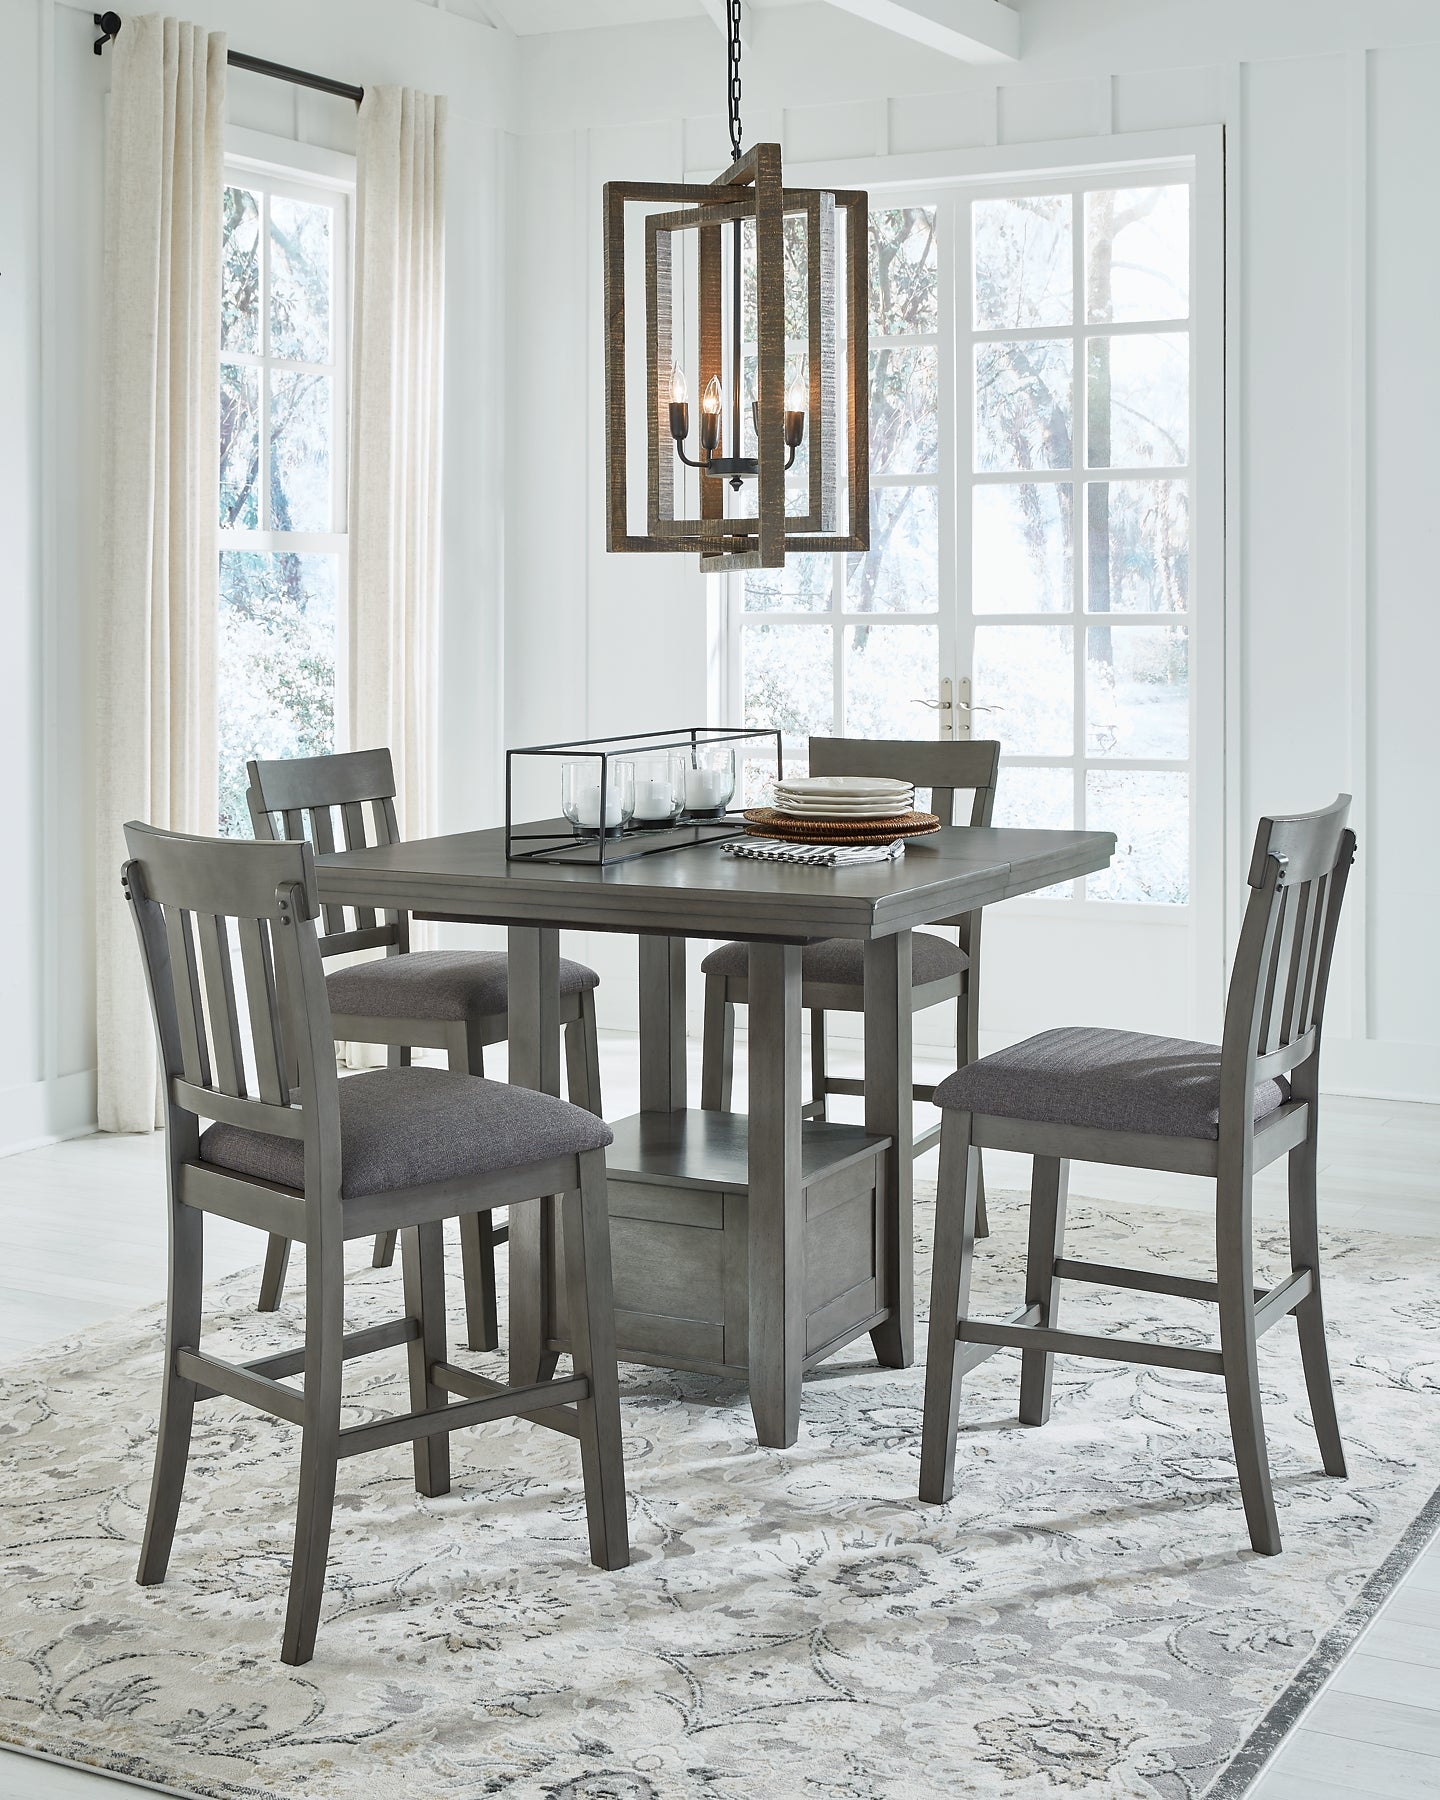 Ashley Express - Hallanden Counter Height Dining Table and 4 Barstools